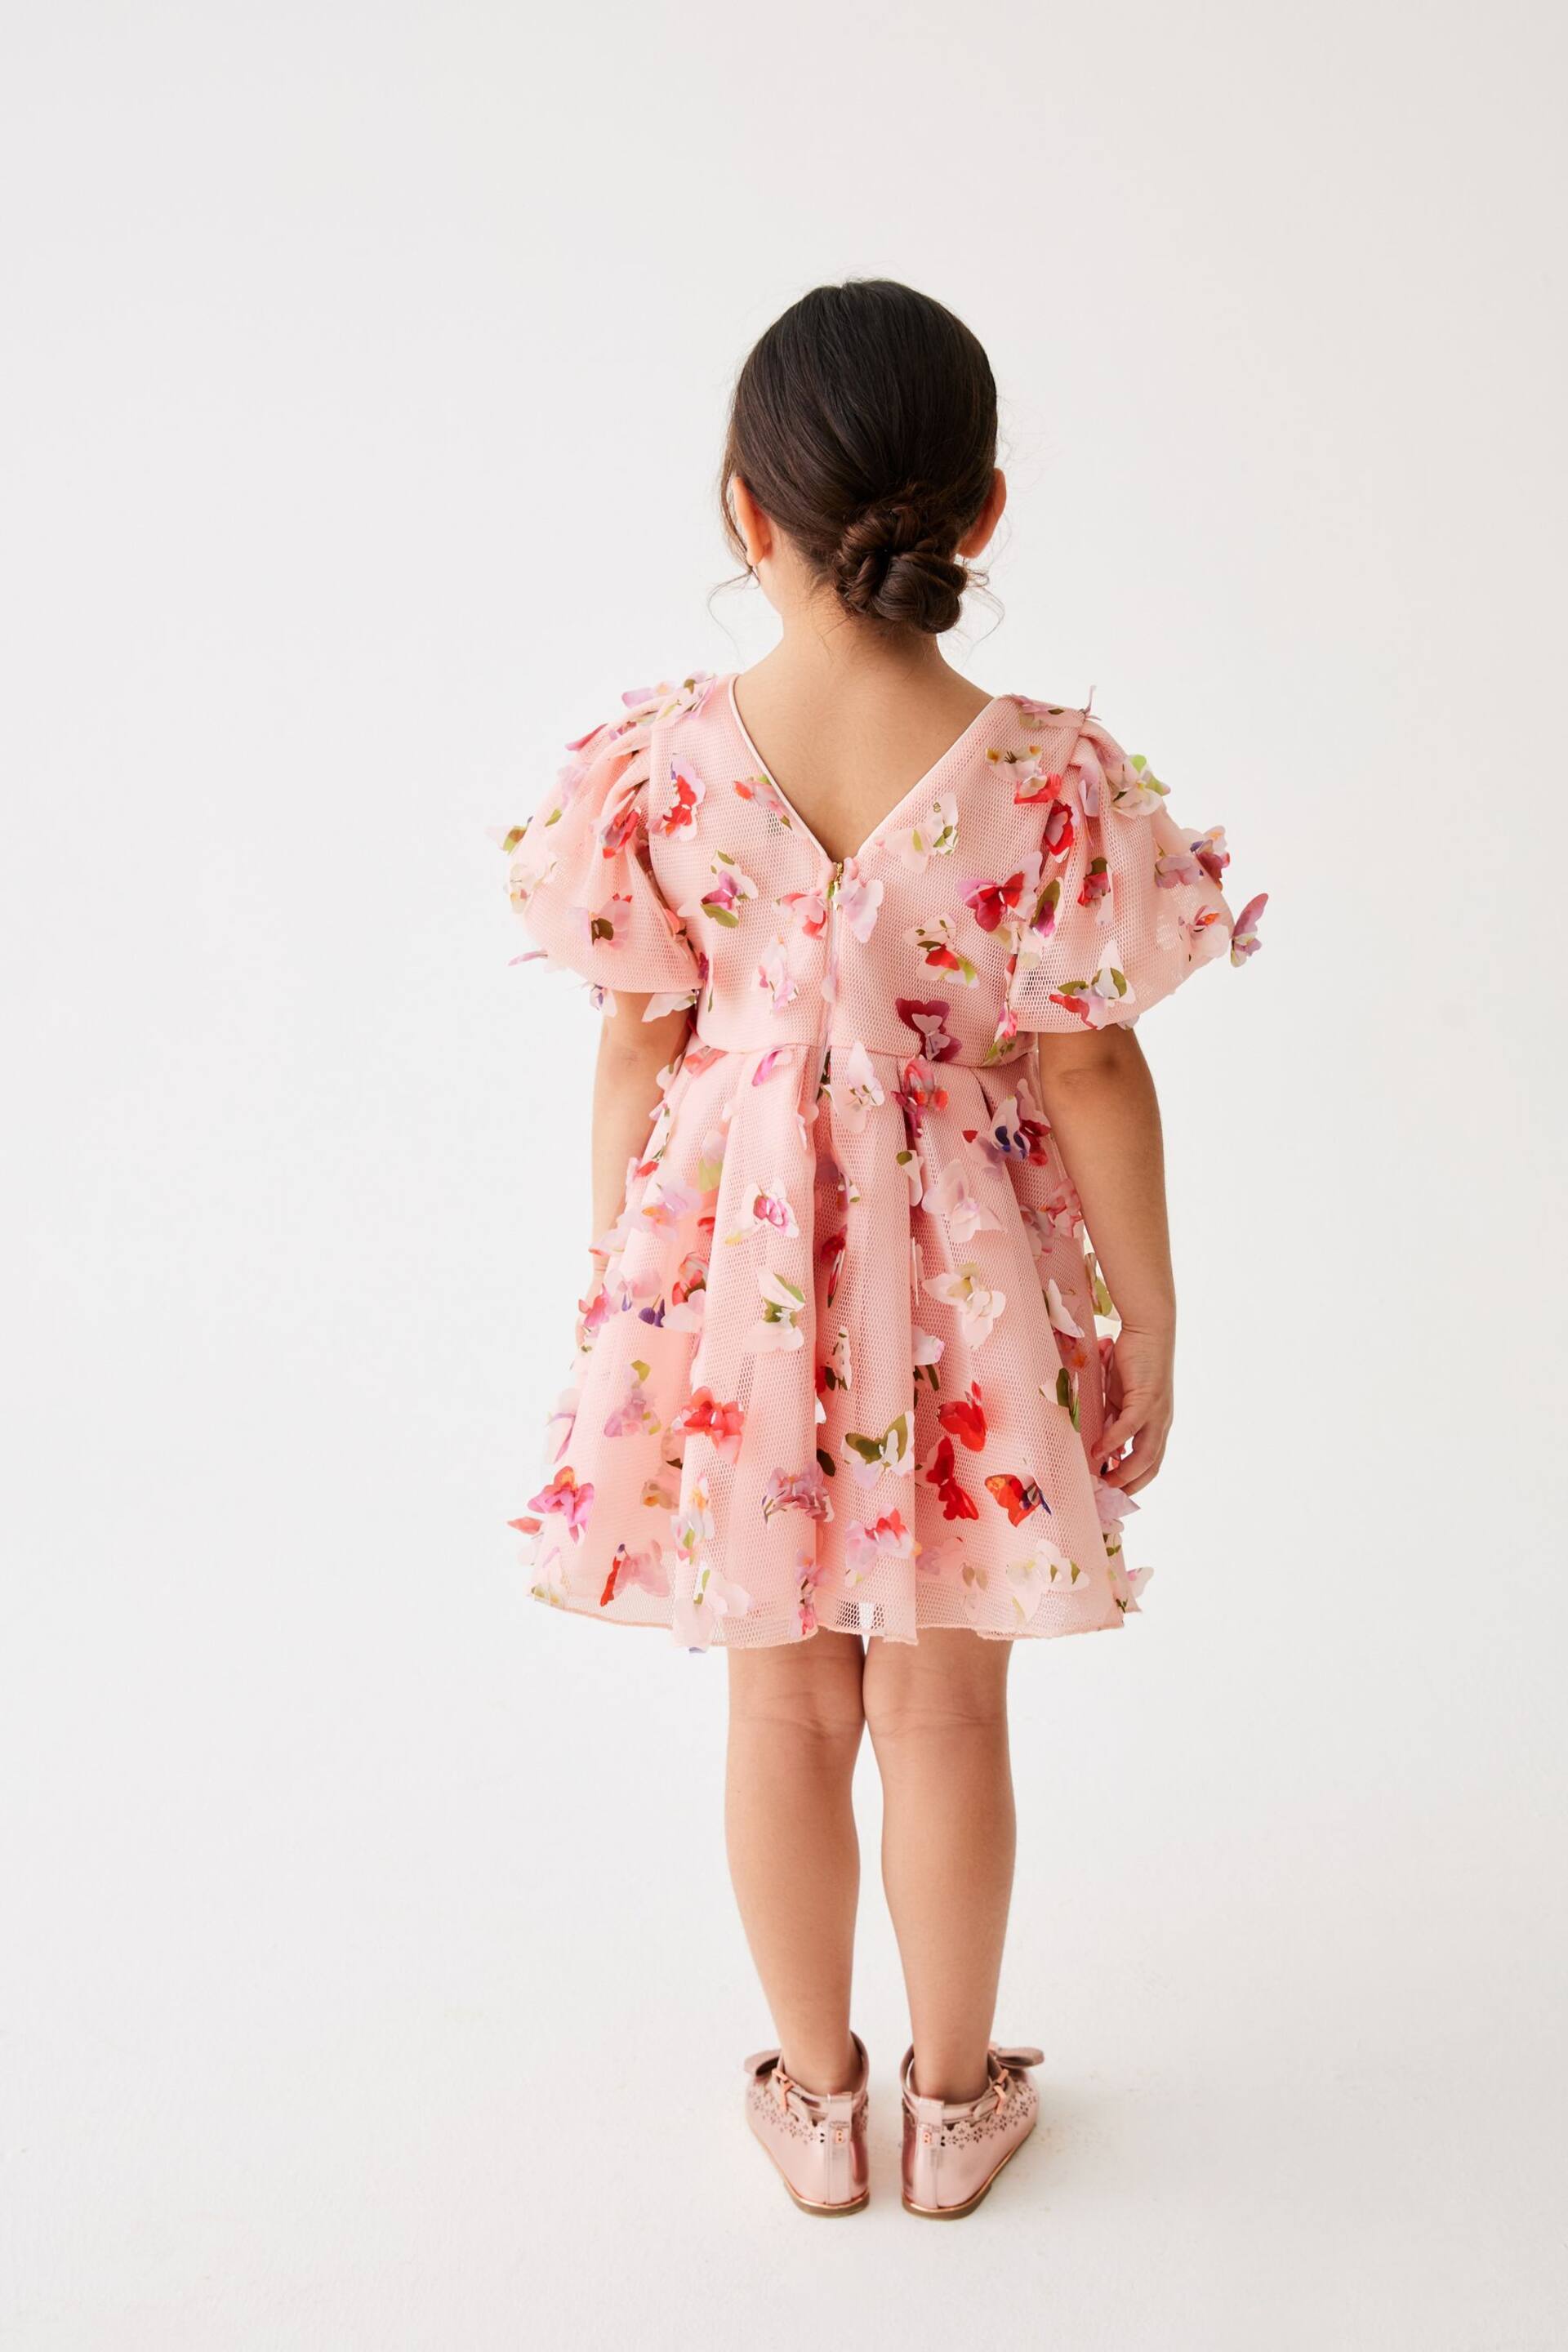 Baker by Ted Baker Pink 3D Butterfly Dress - Image 2 of 10